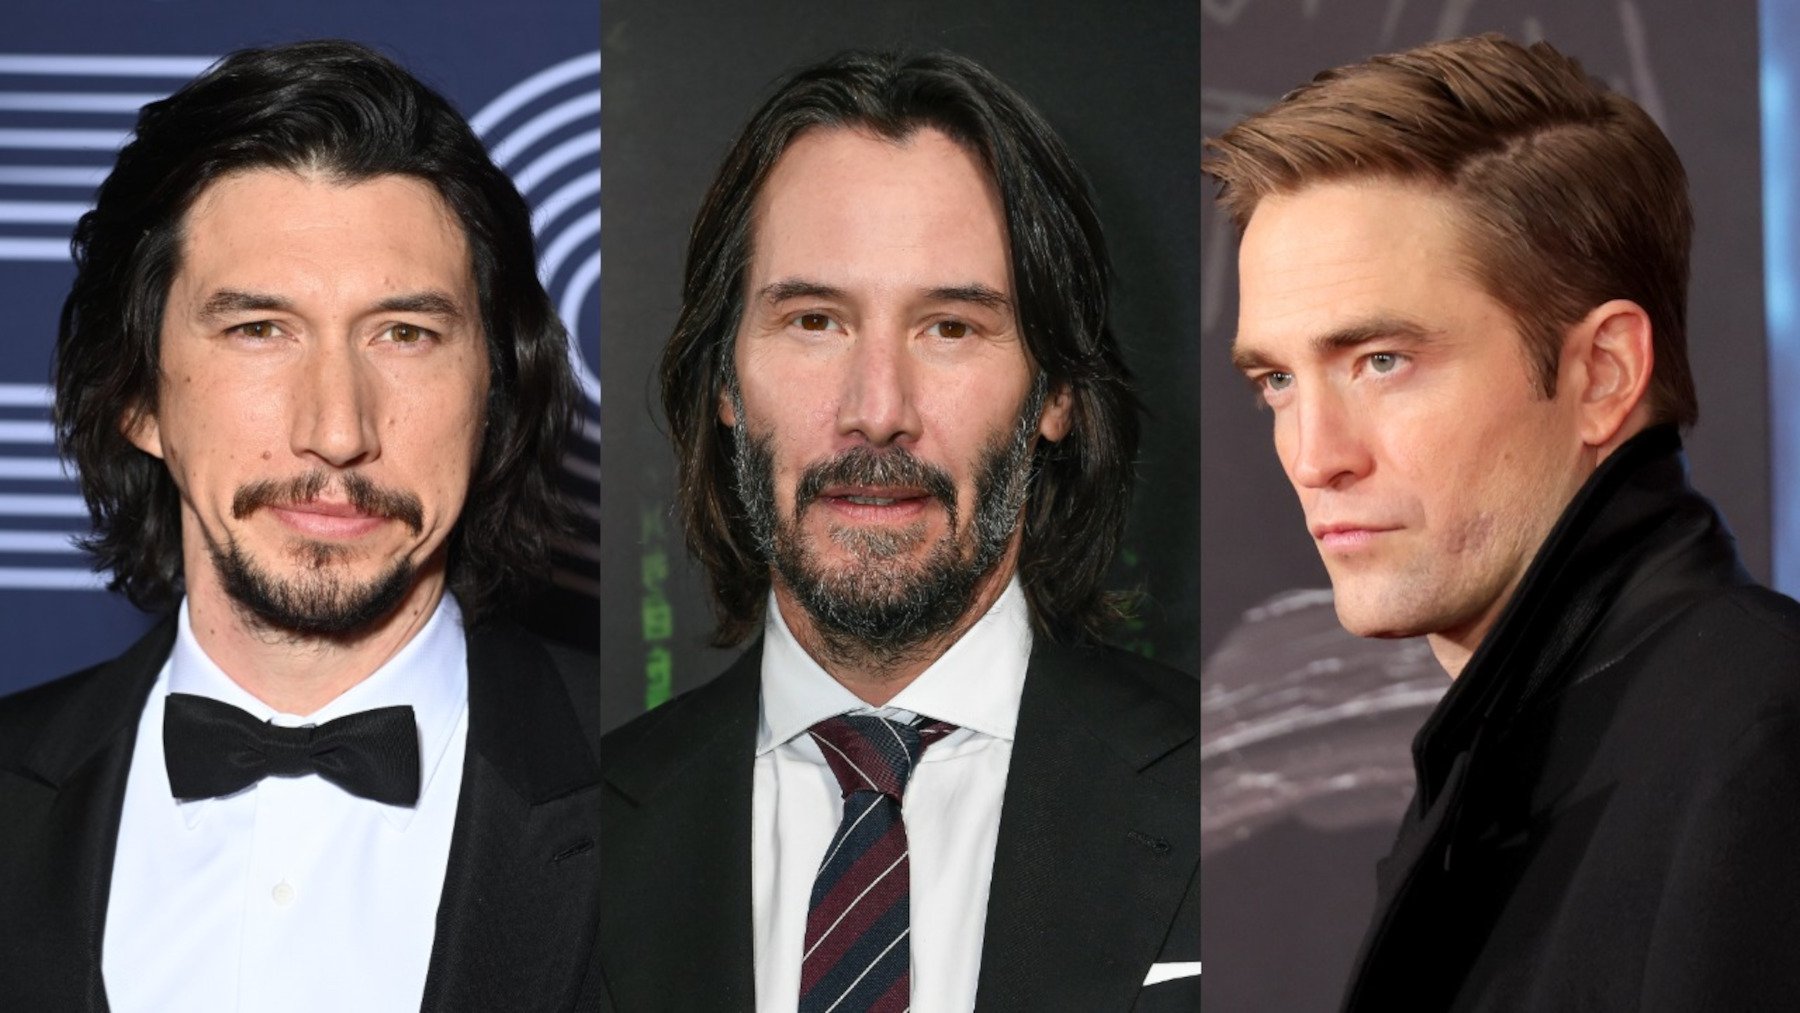 L-R: Adam Driver, Keanu Reeves, and Robert Pattinson, all of whom fans have suggested could voice Shadow in 'Sonic the Hedgehog 3.' Driver is wearing a black suit and bowtie, Reeves is wearing a white shirt and black suit, and Pattinson is wearing a black coat.